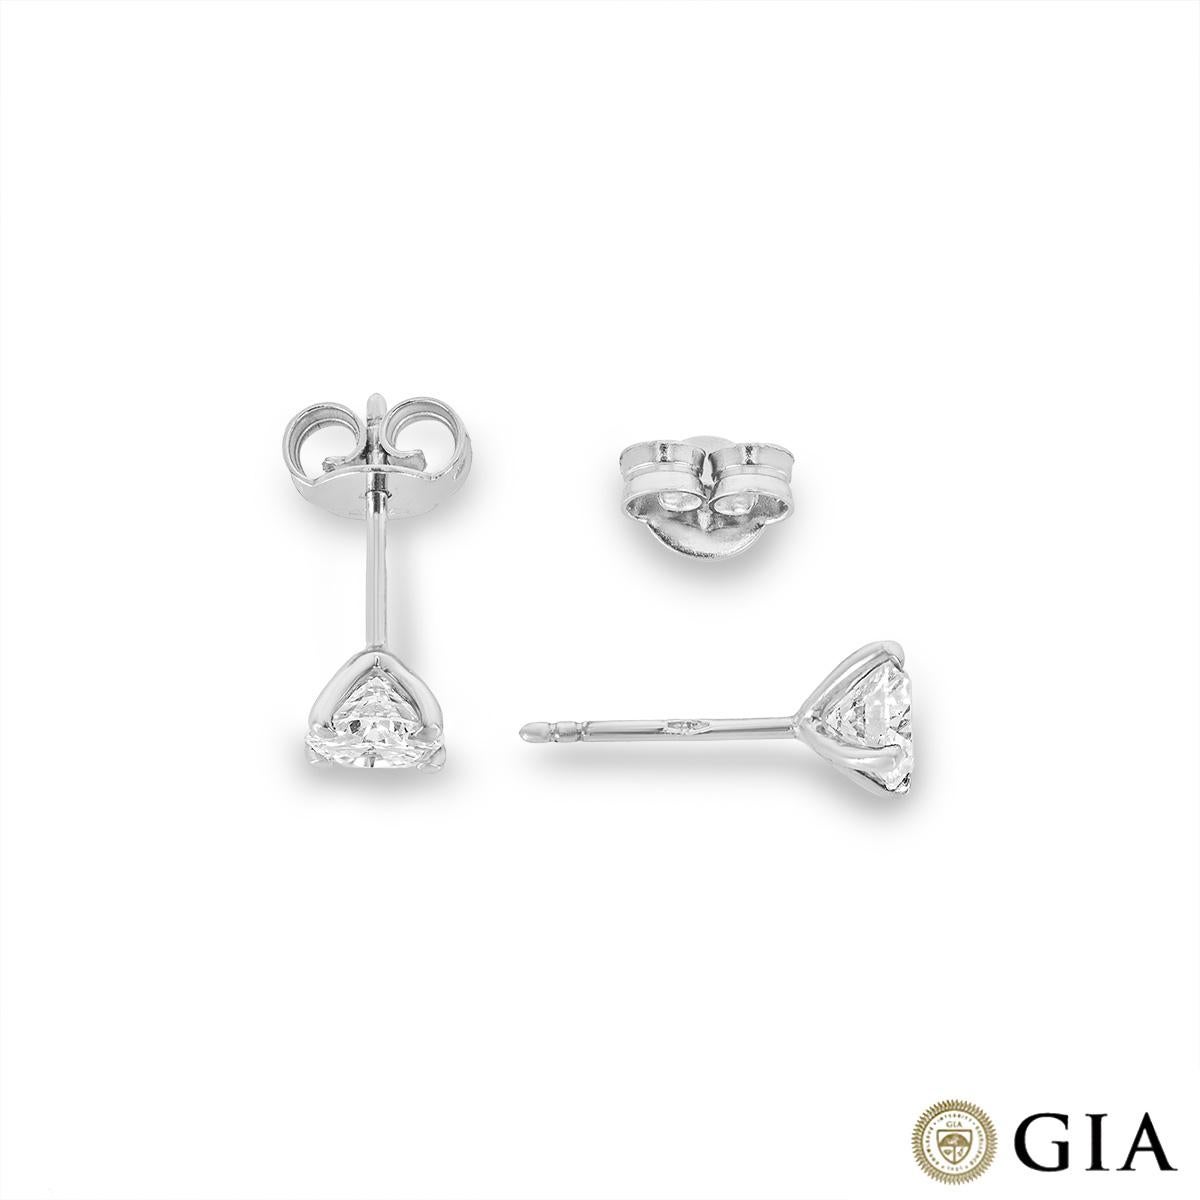 GIA Certified White Gold Diamond Earrings 1.04ct TDW In Excellent Condition For Sale In London, GB